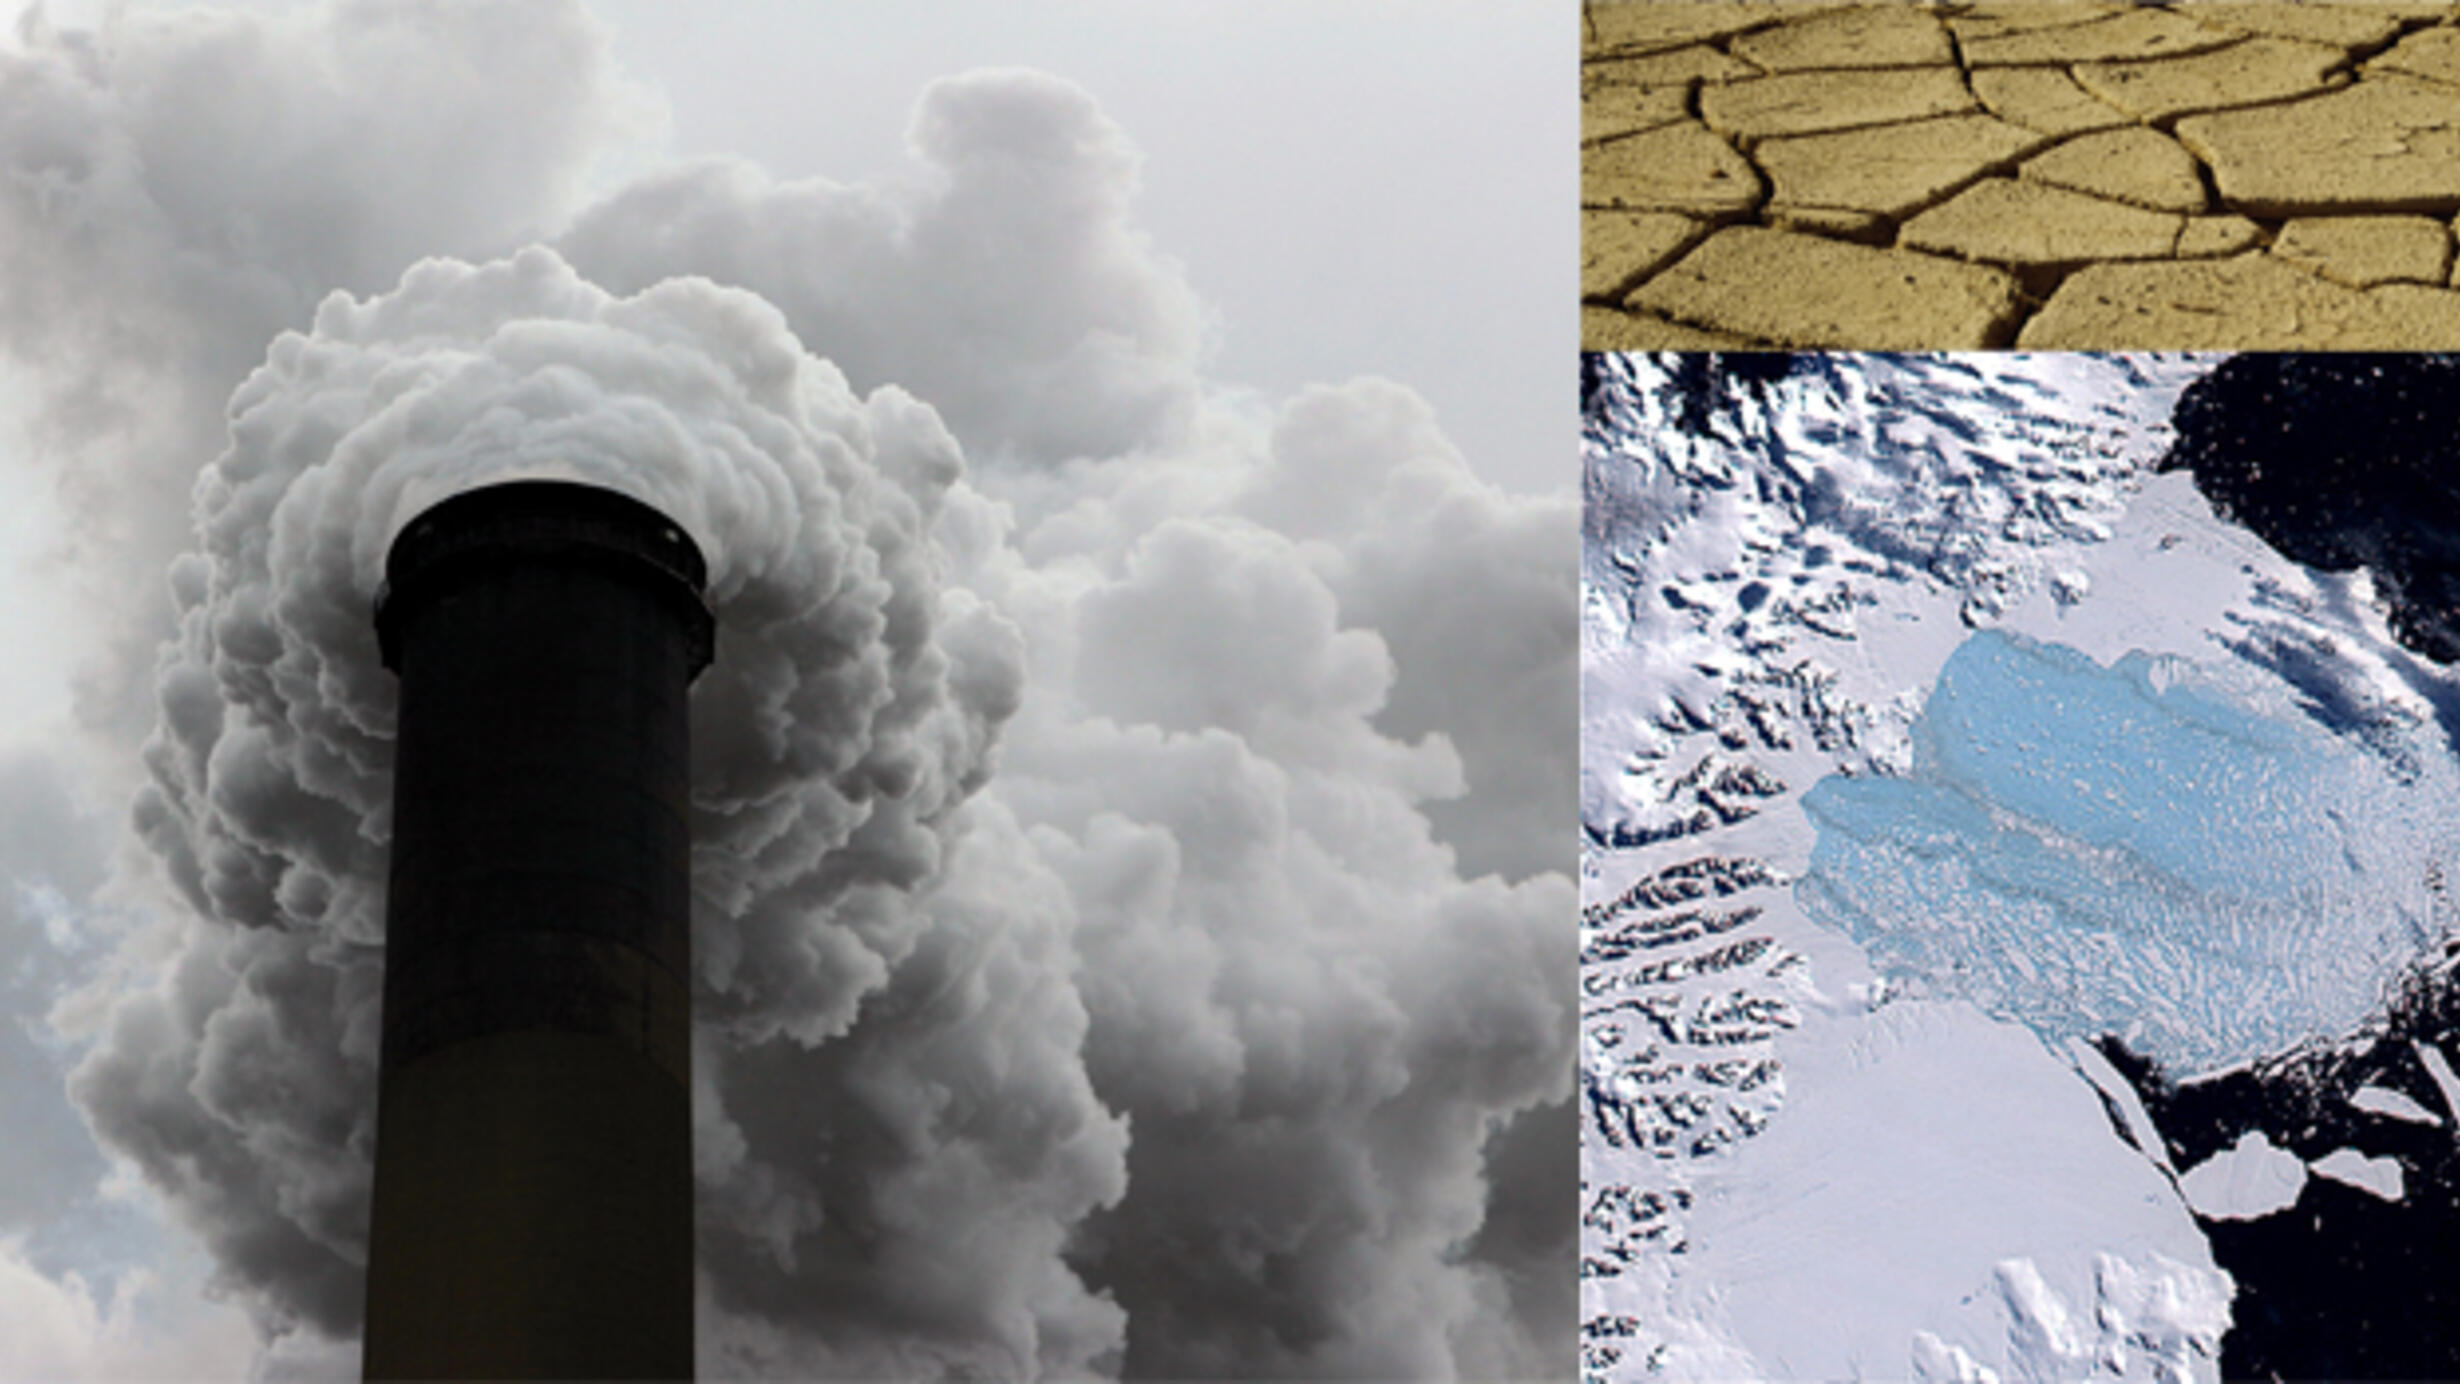 Three photos: a chimney releasing billowing white gas; a close-up of cracked dry earth; an aerial photo of an ice shelf with broken sections and melting water flowing into the sea.